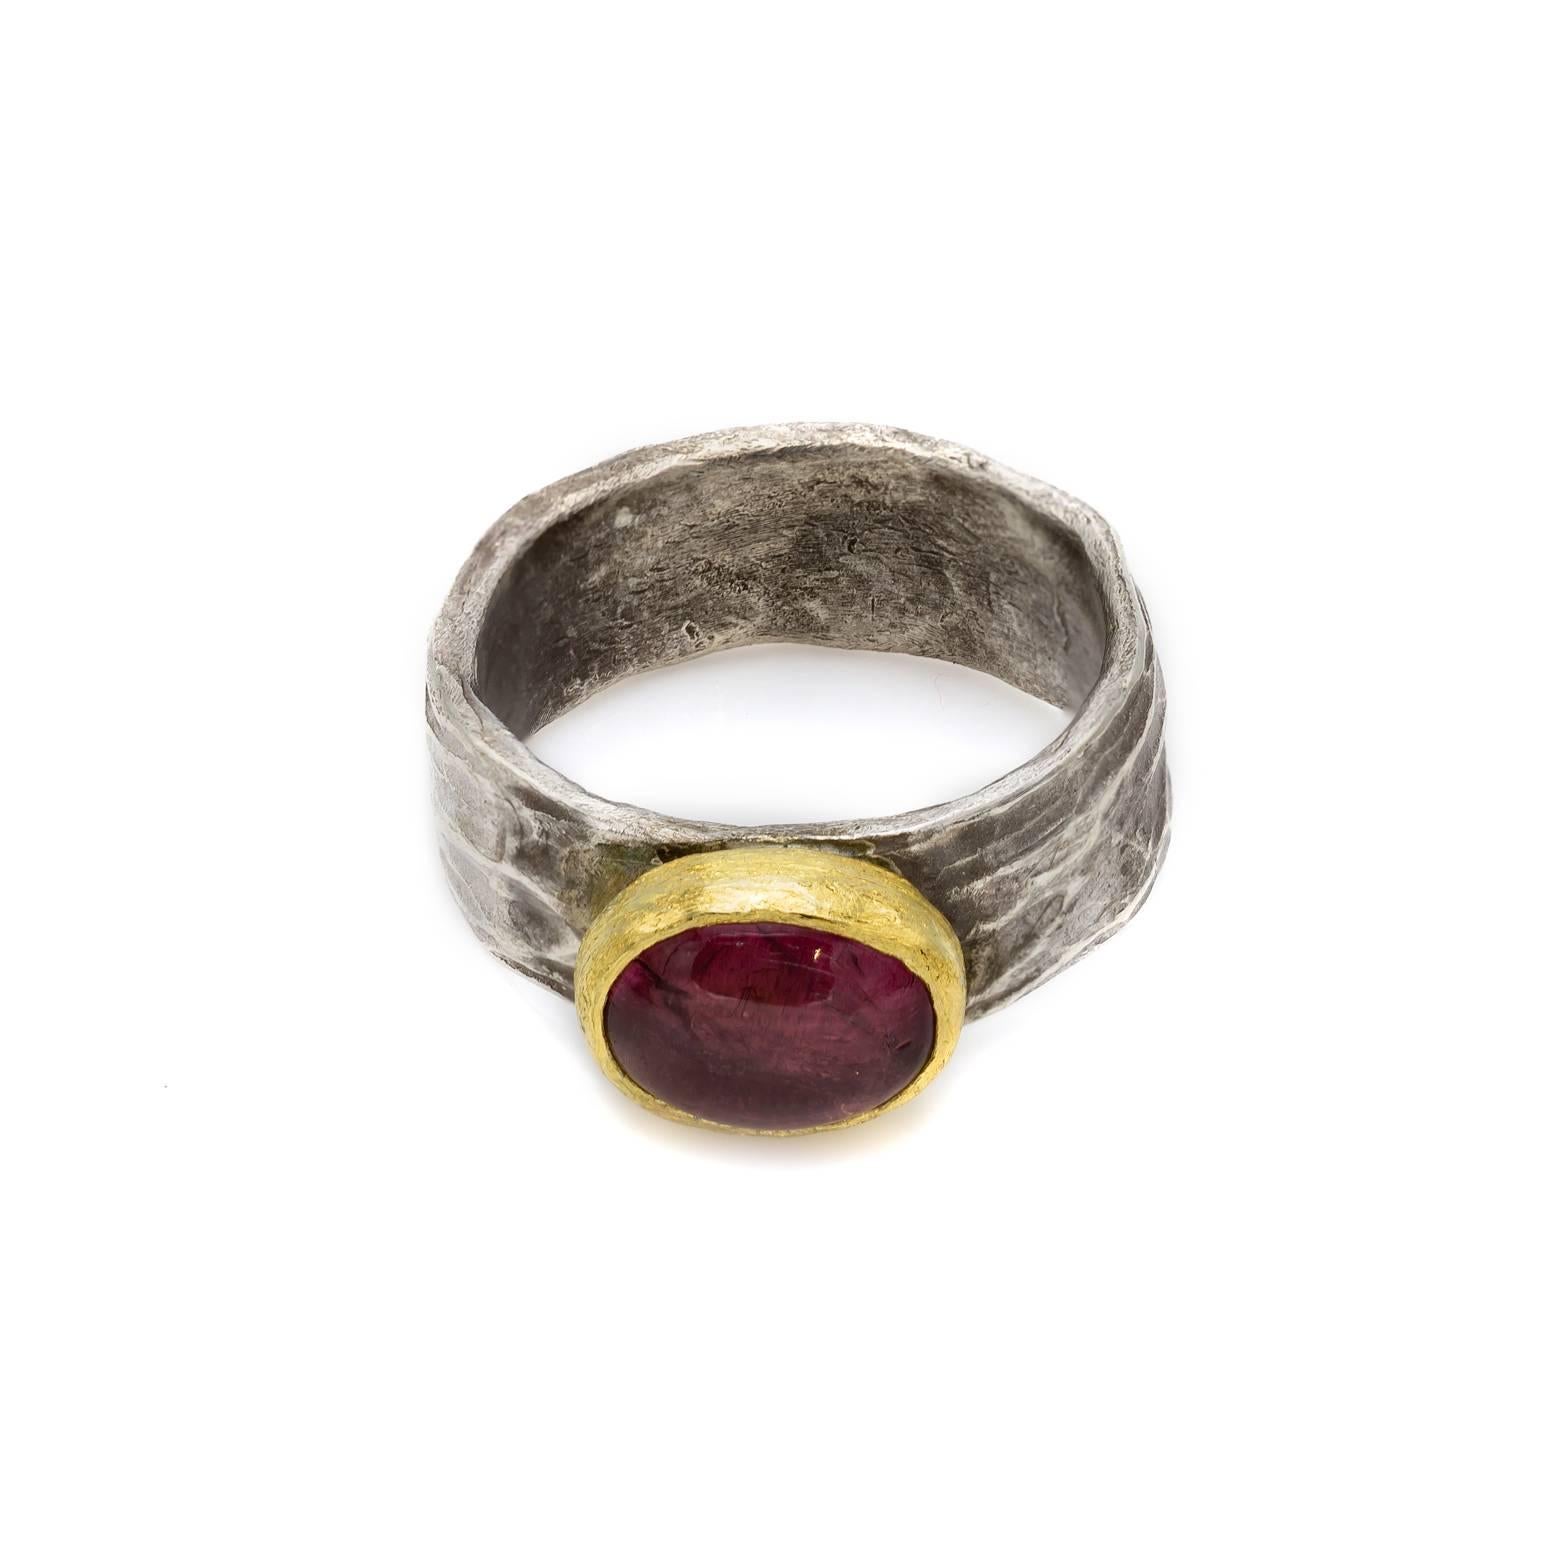 Gorgeous and Artistic! This one of kind ring is fun and unique as the textures of the metal are hammered in a wave-like fashion creating a beautiful contrast to the soft pink tourmaline cabochon. 14K yellow gold is set around the centerpiece adding